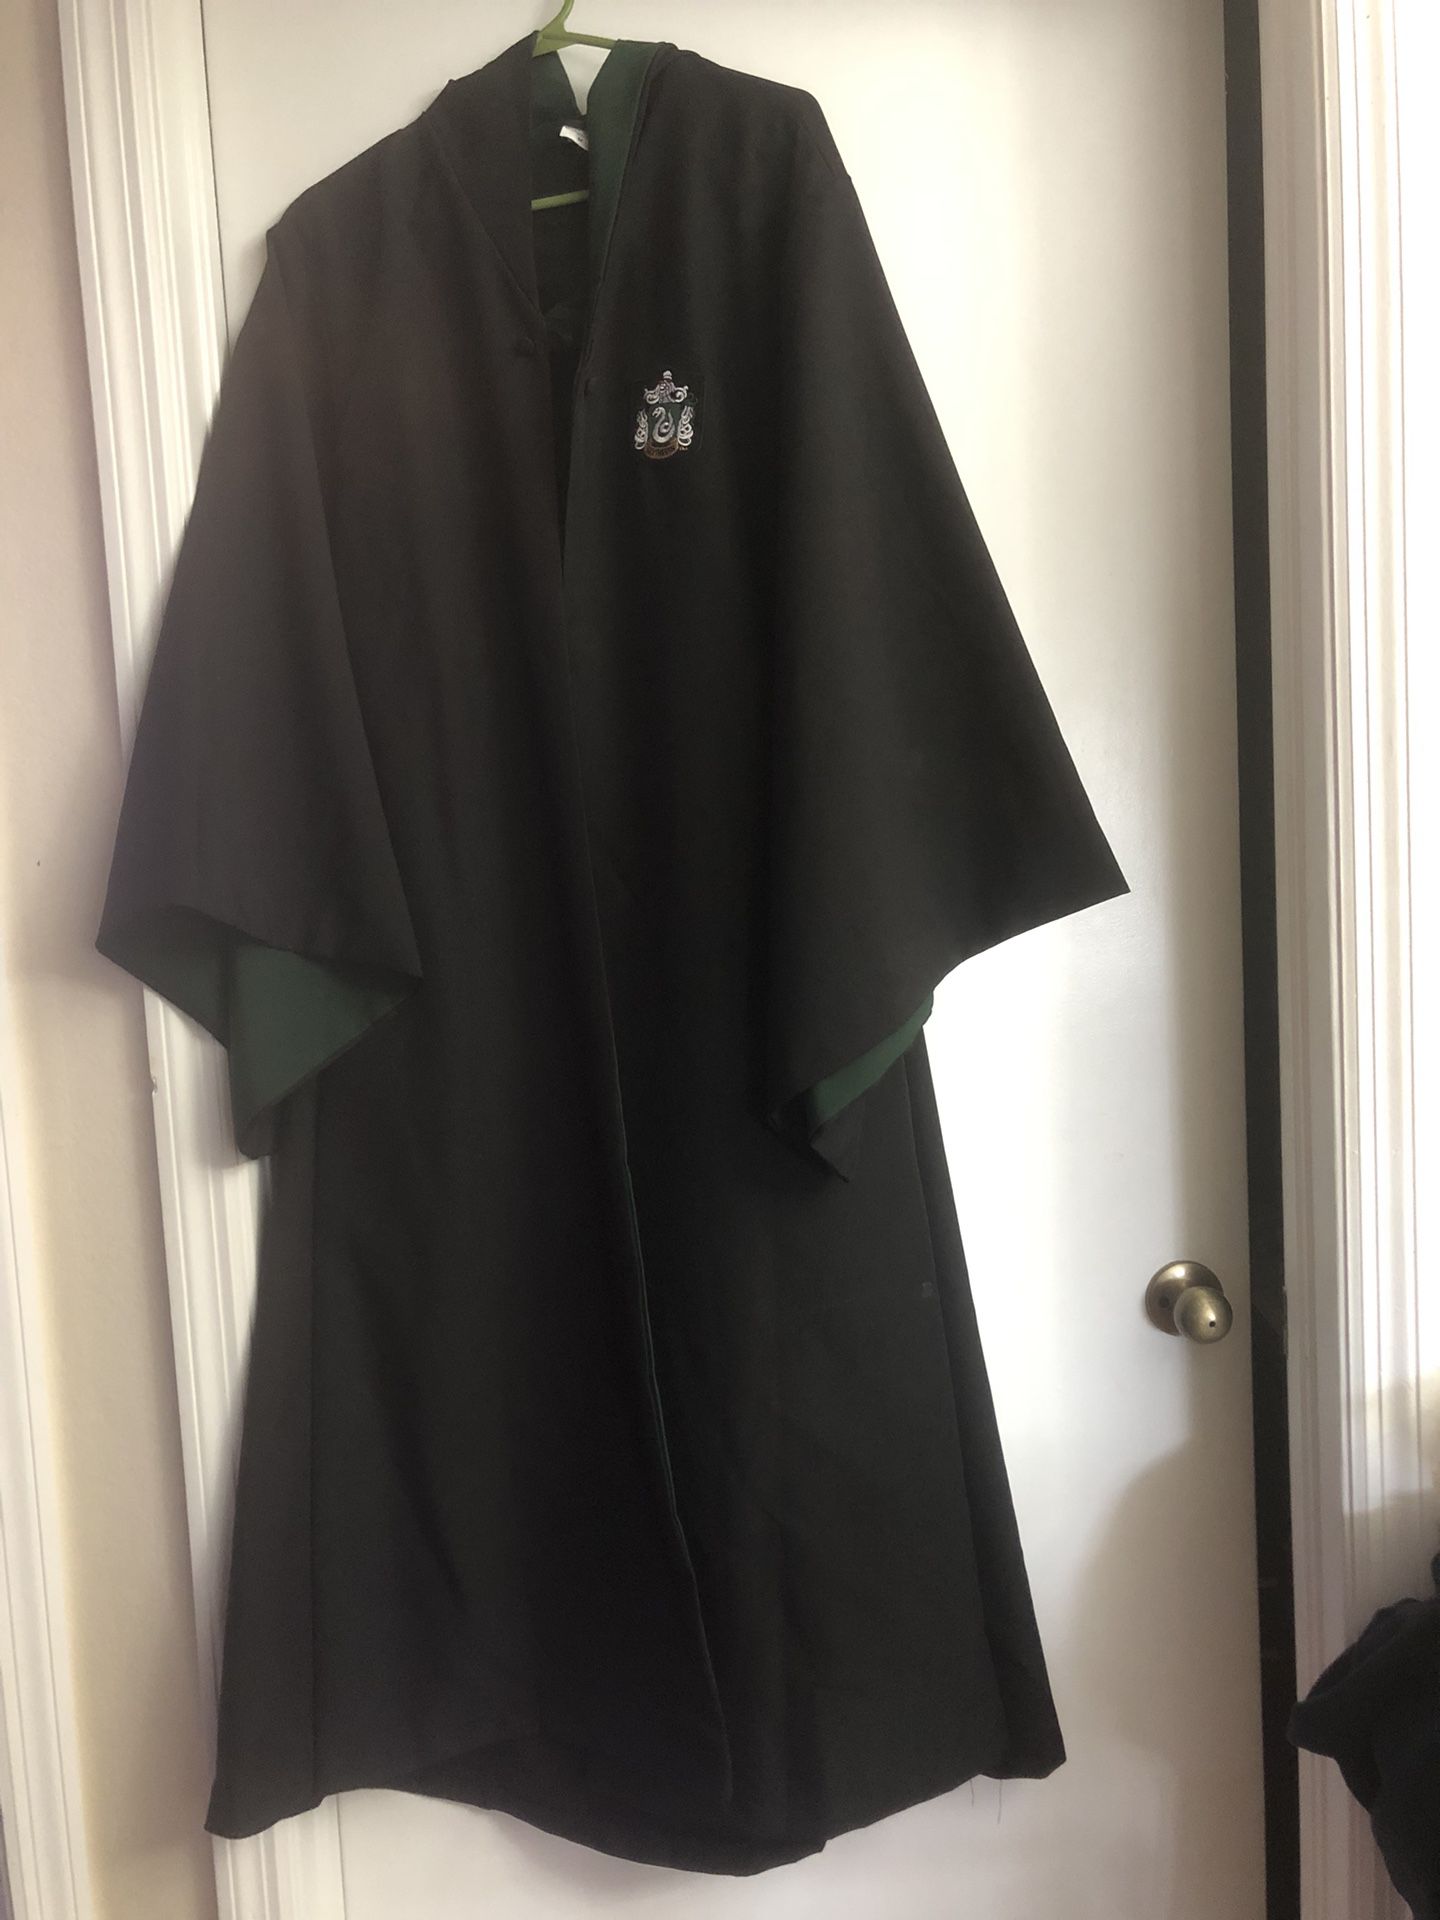 Slytherin Robes, Medium,  From Universal Parks 